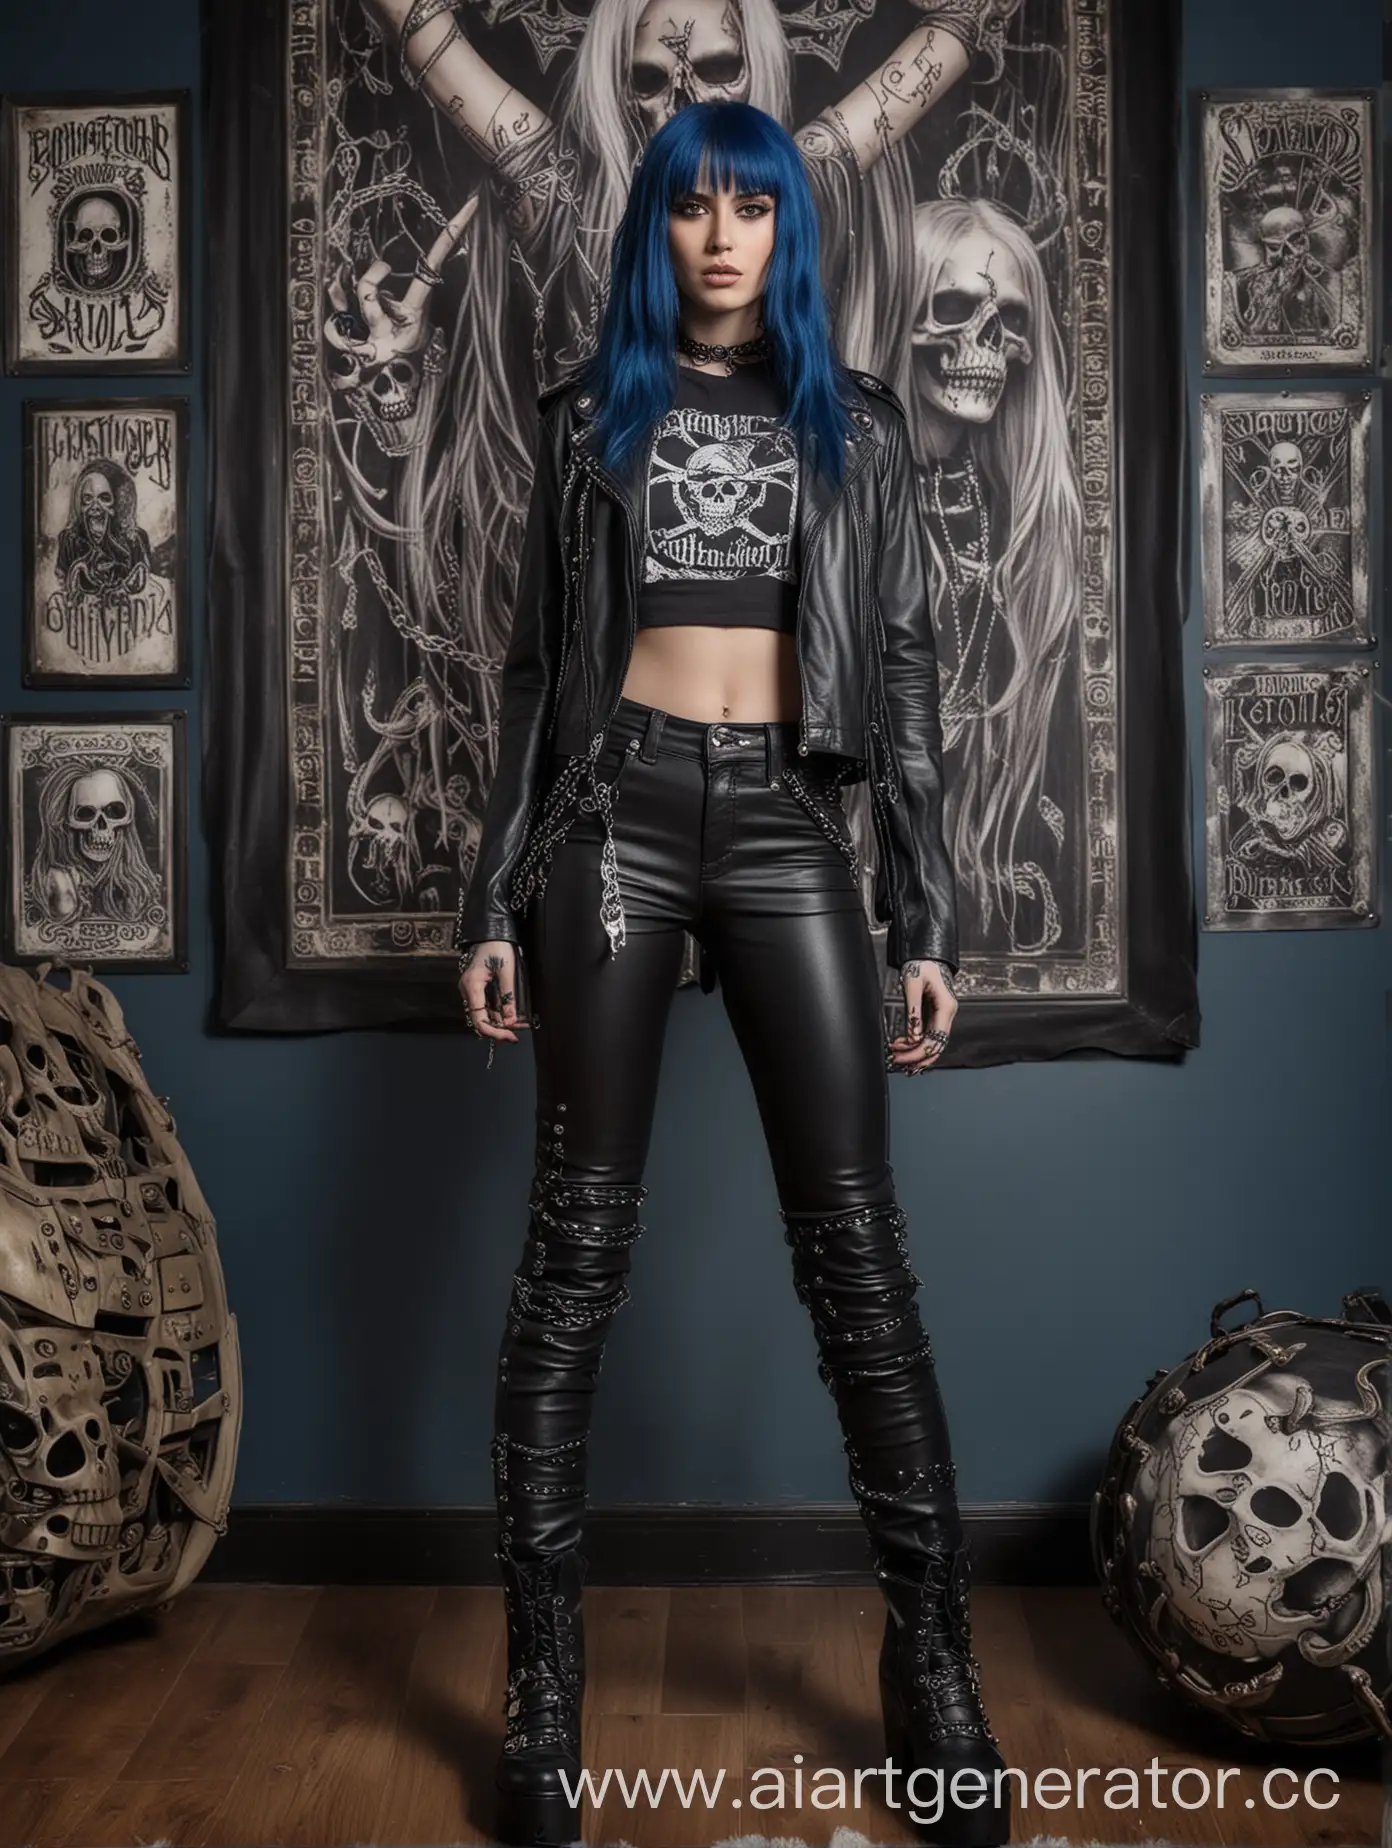 A fierce heavy metal enthusiast displaying the iconic metal horns gesture 🤘. She wears a black Slayer band printed top, adorned with a leather jacket, pants, and rough platform boots. Chains and spikes add to her gothic style. With a pretty face framed by long dark blue hair, she showcases skull tattoos. The room features Slayer skull metal posters in the background, capturing the essence of lifestyle photography. The image is candid, realistic, and epic, shot in medium close-up focusing on her upper body.